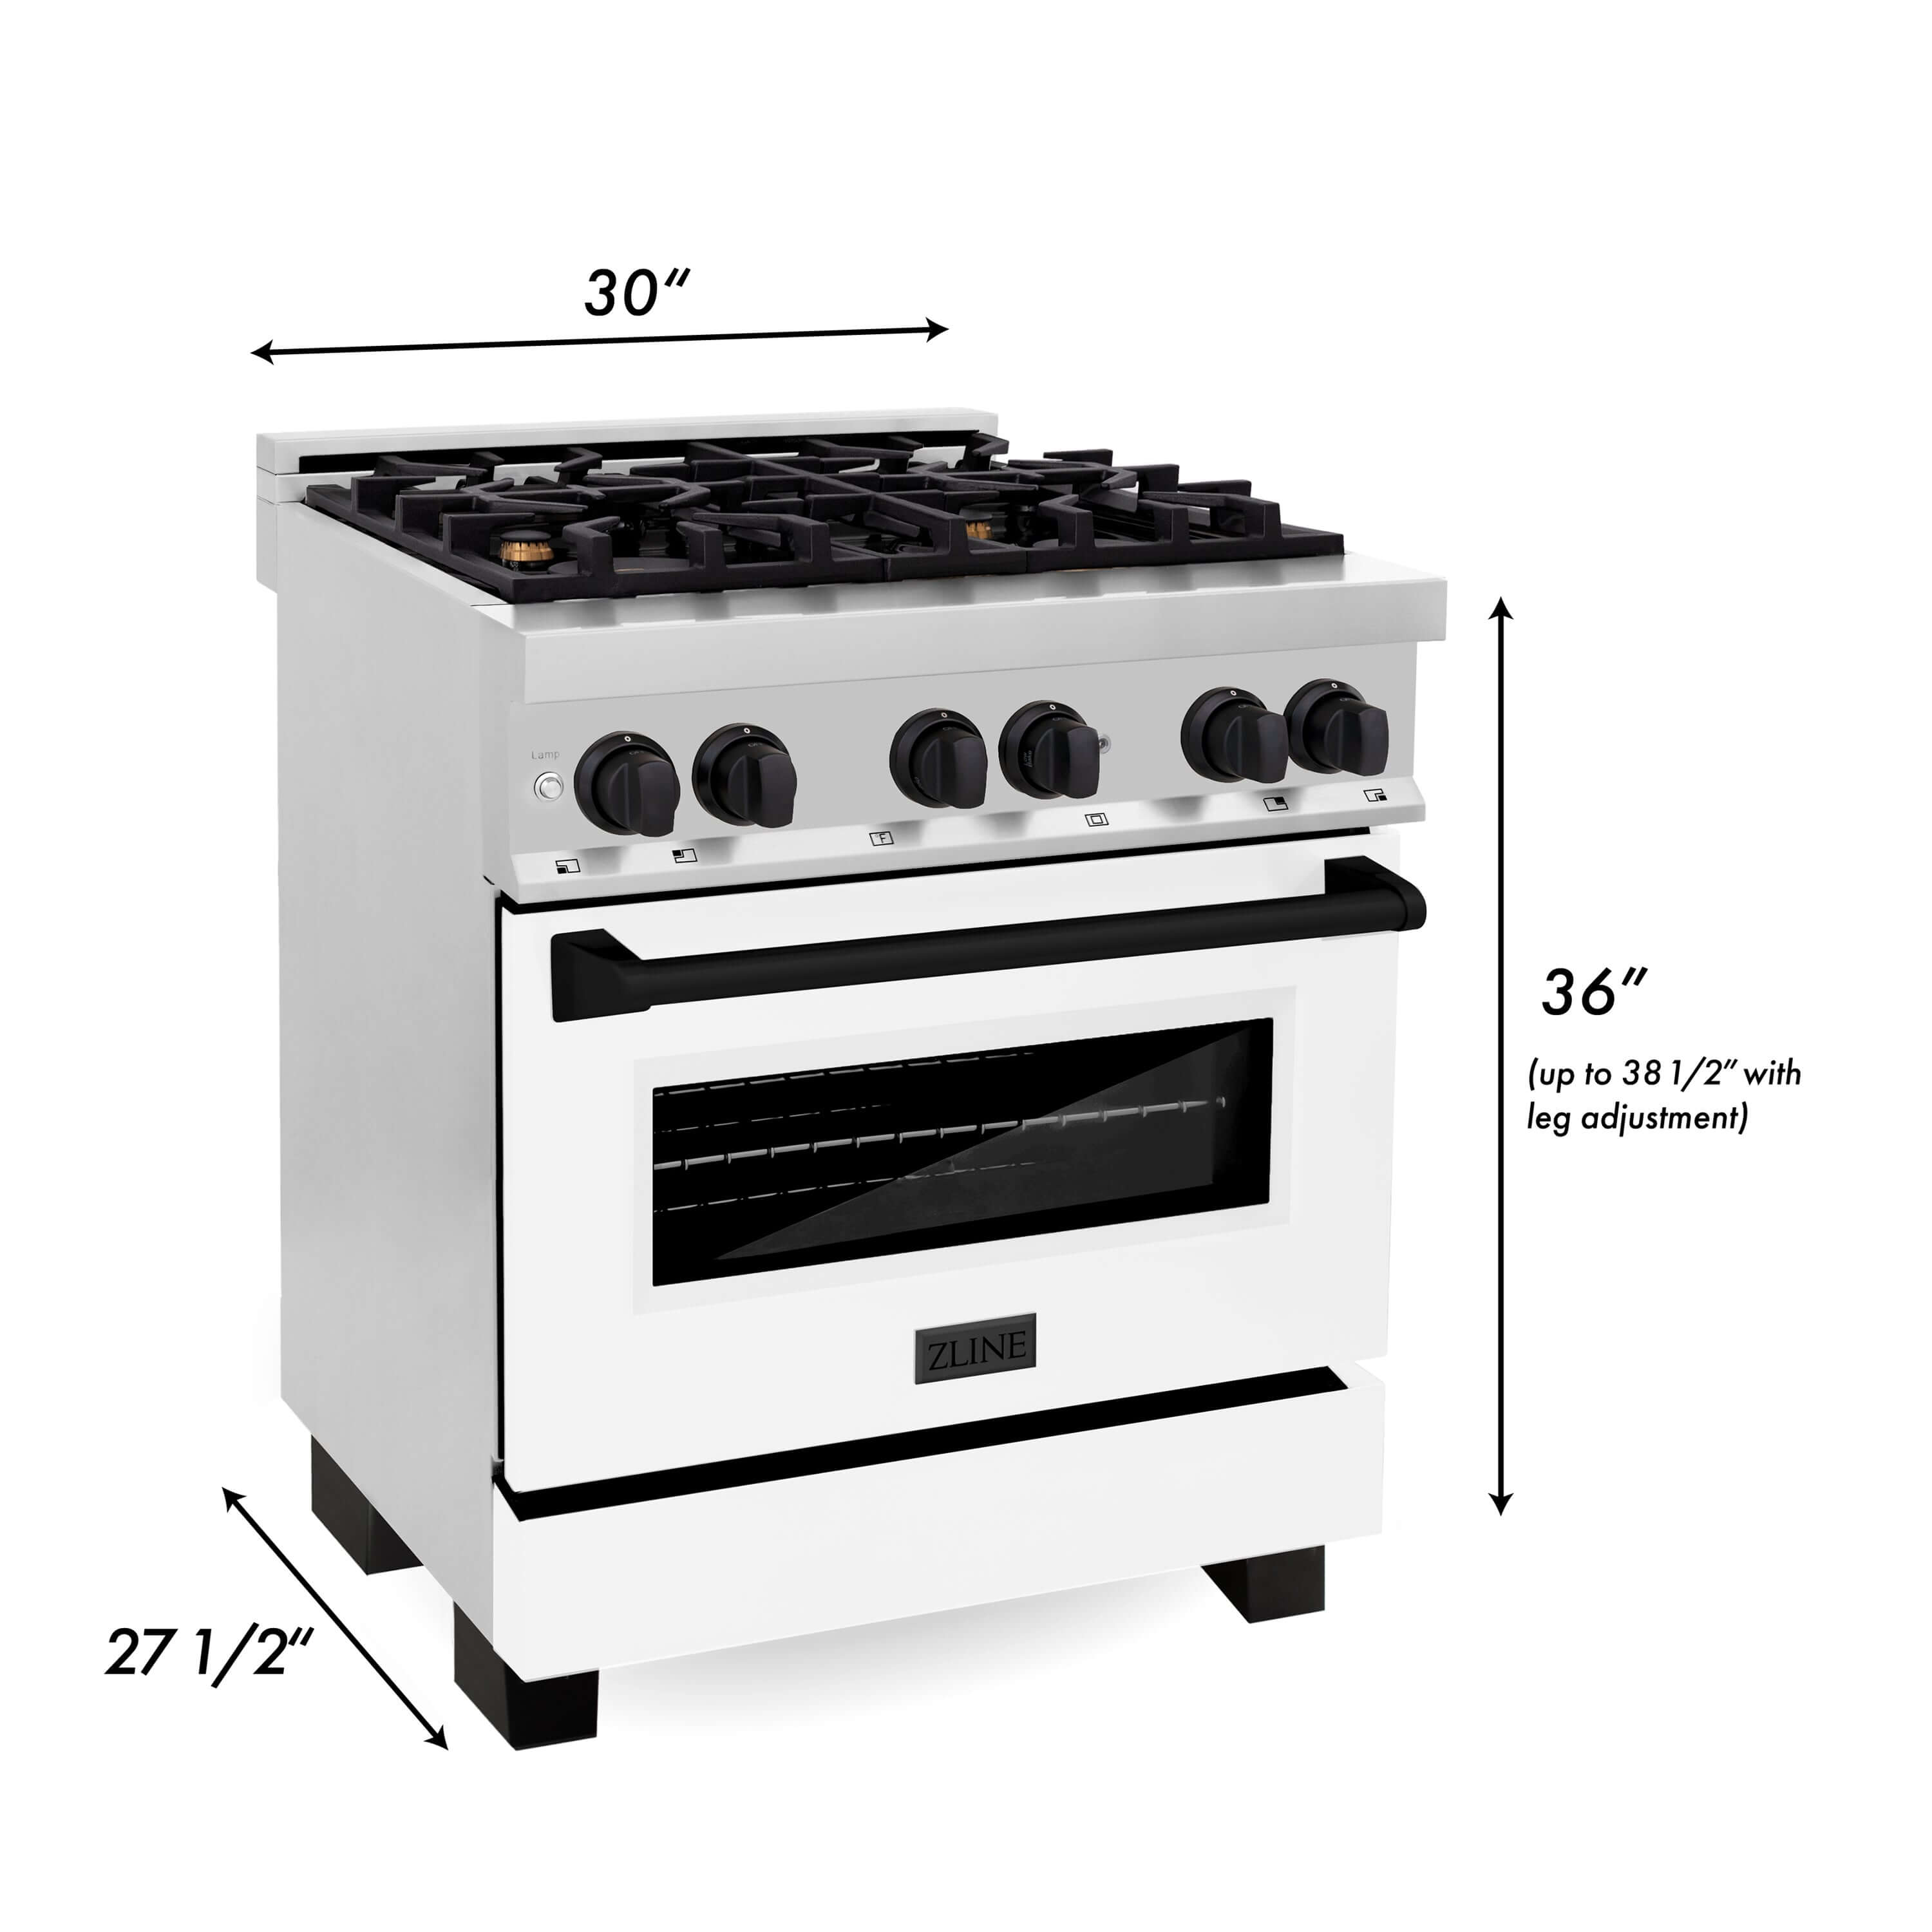 ZLINE Autograph Edition 30 in. Kitchen Package with Stainless Steel Dual Fuel Range with White Matte Door and Range Hood with Matte Black Accents (2AKP-RAWMRH30-MB) dimensional diagram with measurements.